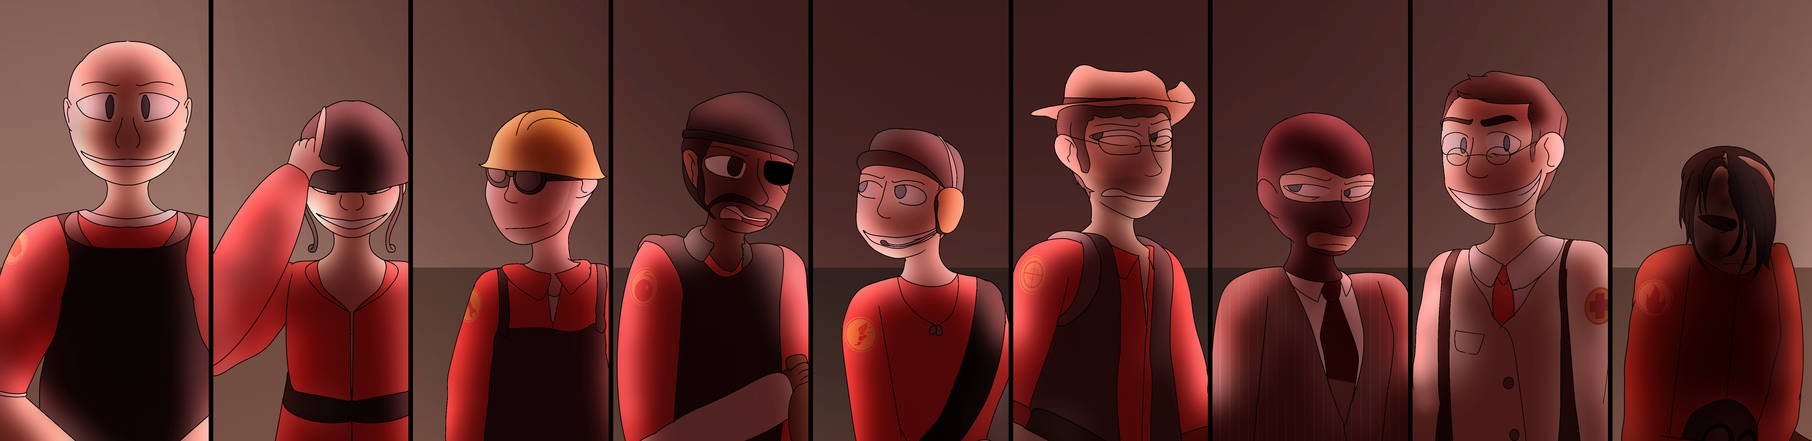 'The Dudes of TF2'